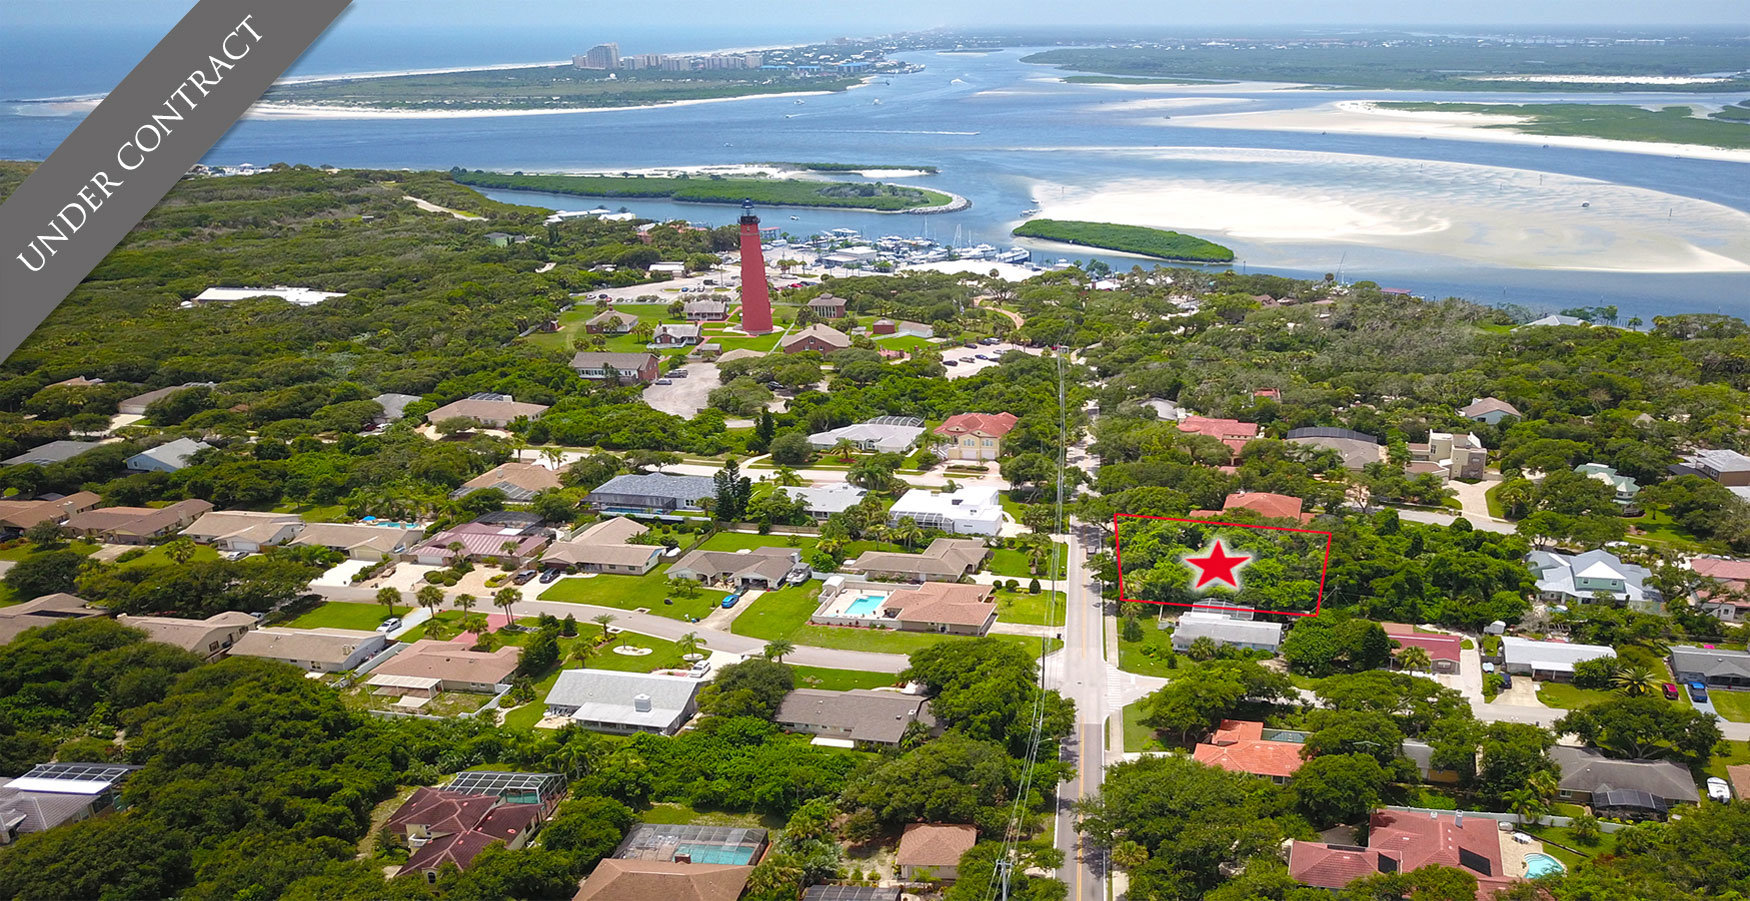 Ponce Inlet Real Estate For Sale. 4908 S Peninsula Drive. Beachside river view land for sale